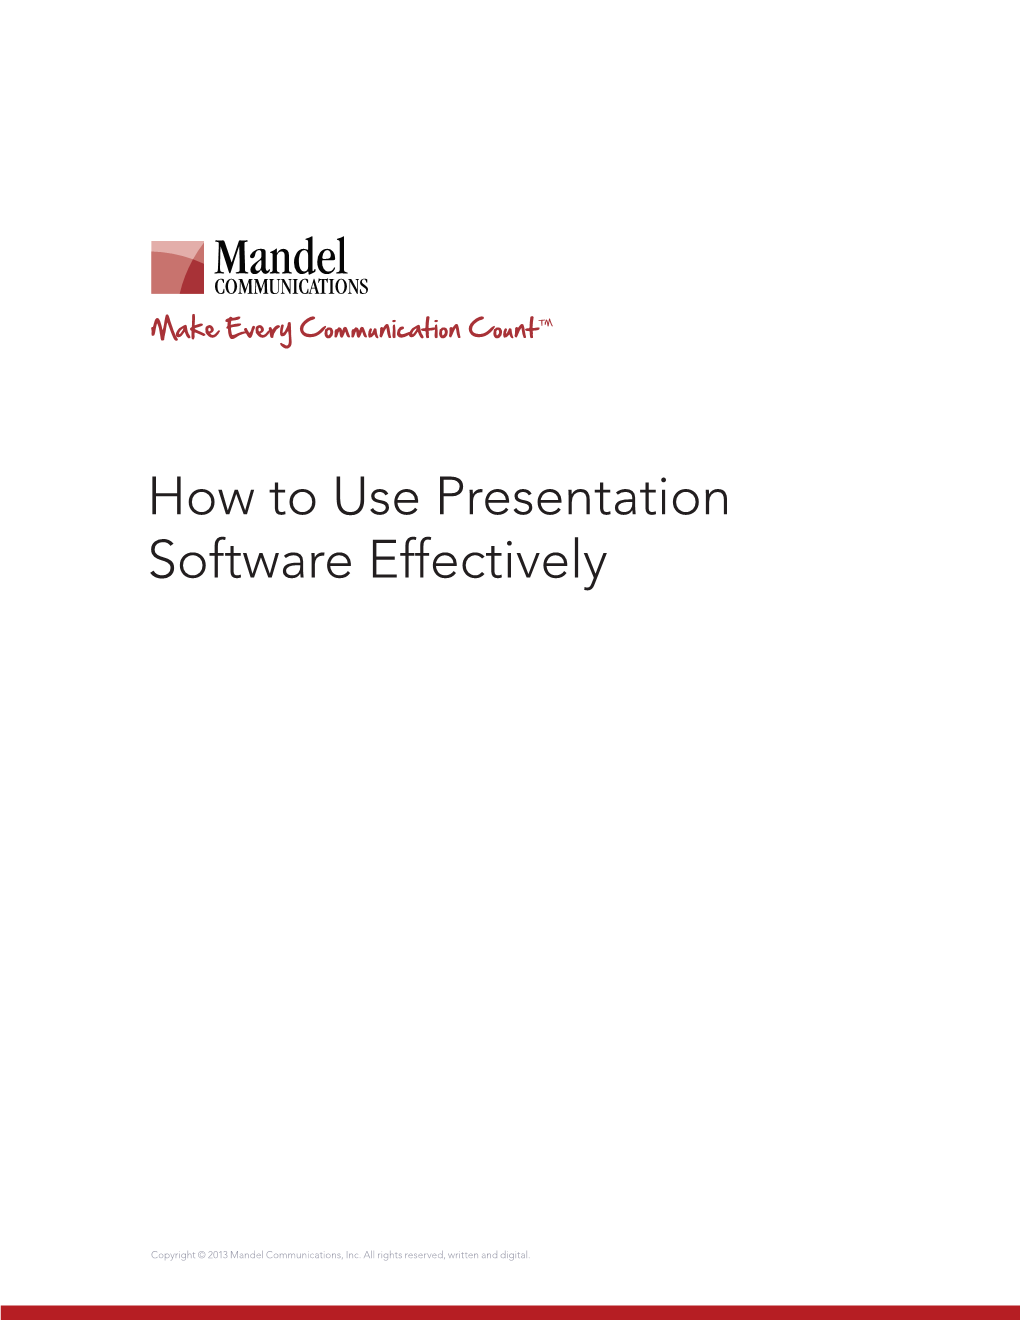 How to Use Presentation Software Effectively